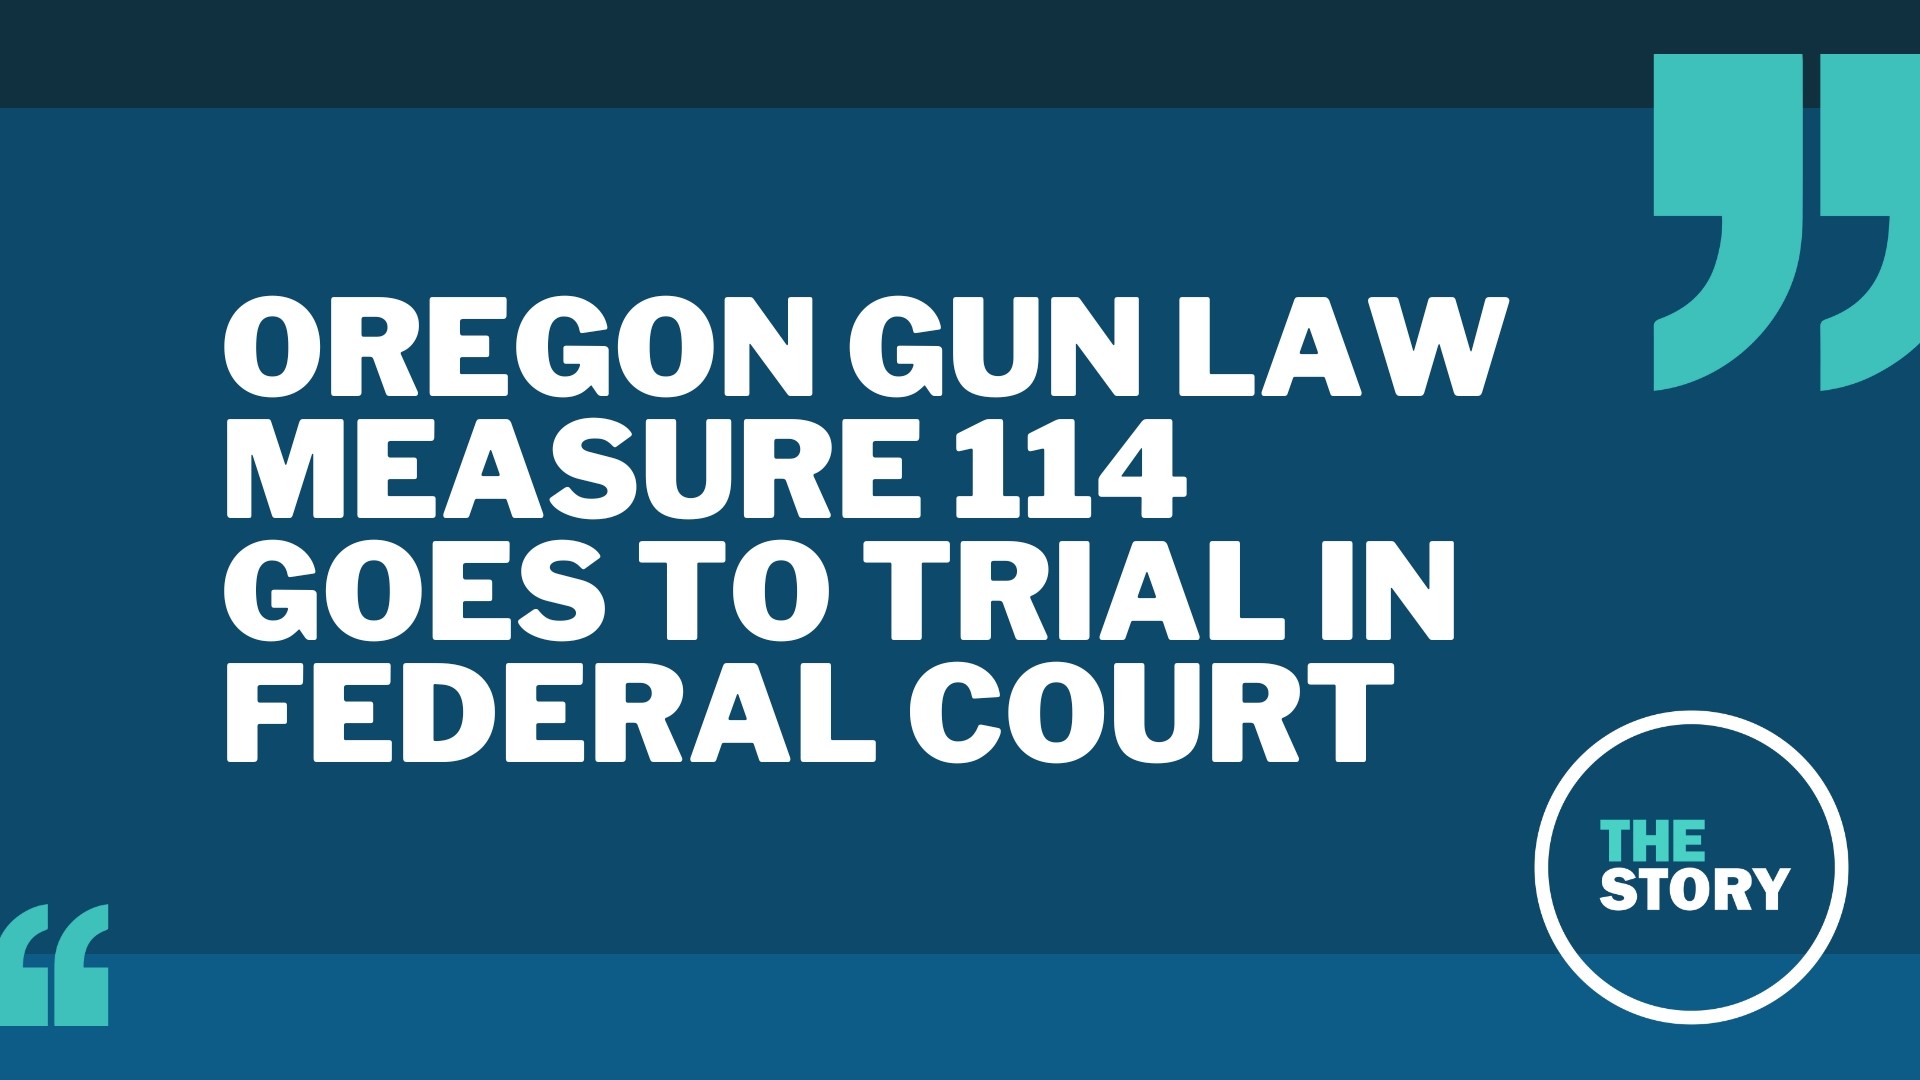 While this case is important to Measure 114's survival, it is not the one holding up implementation of the gun law. That's a state-level case in Harney County.